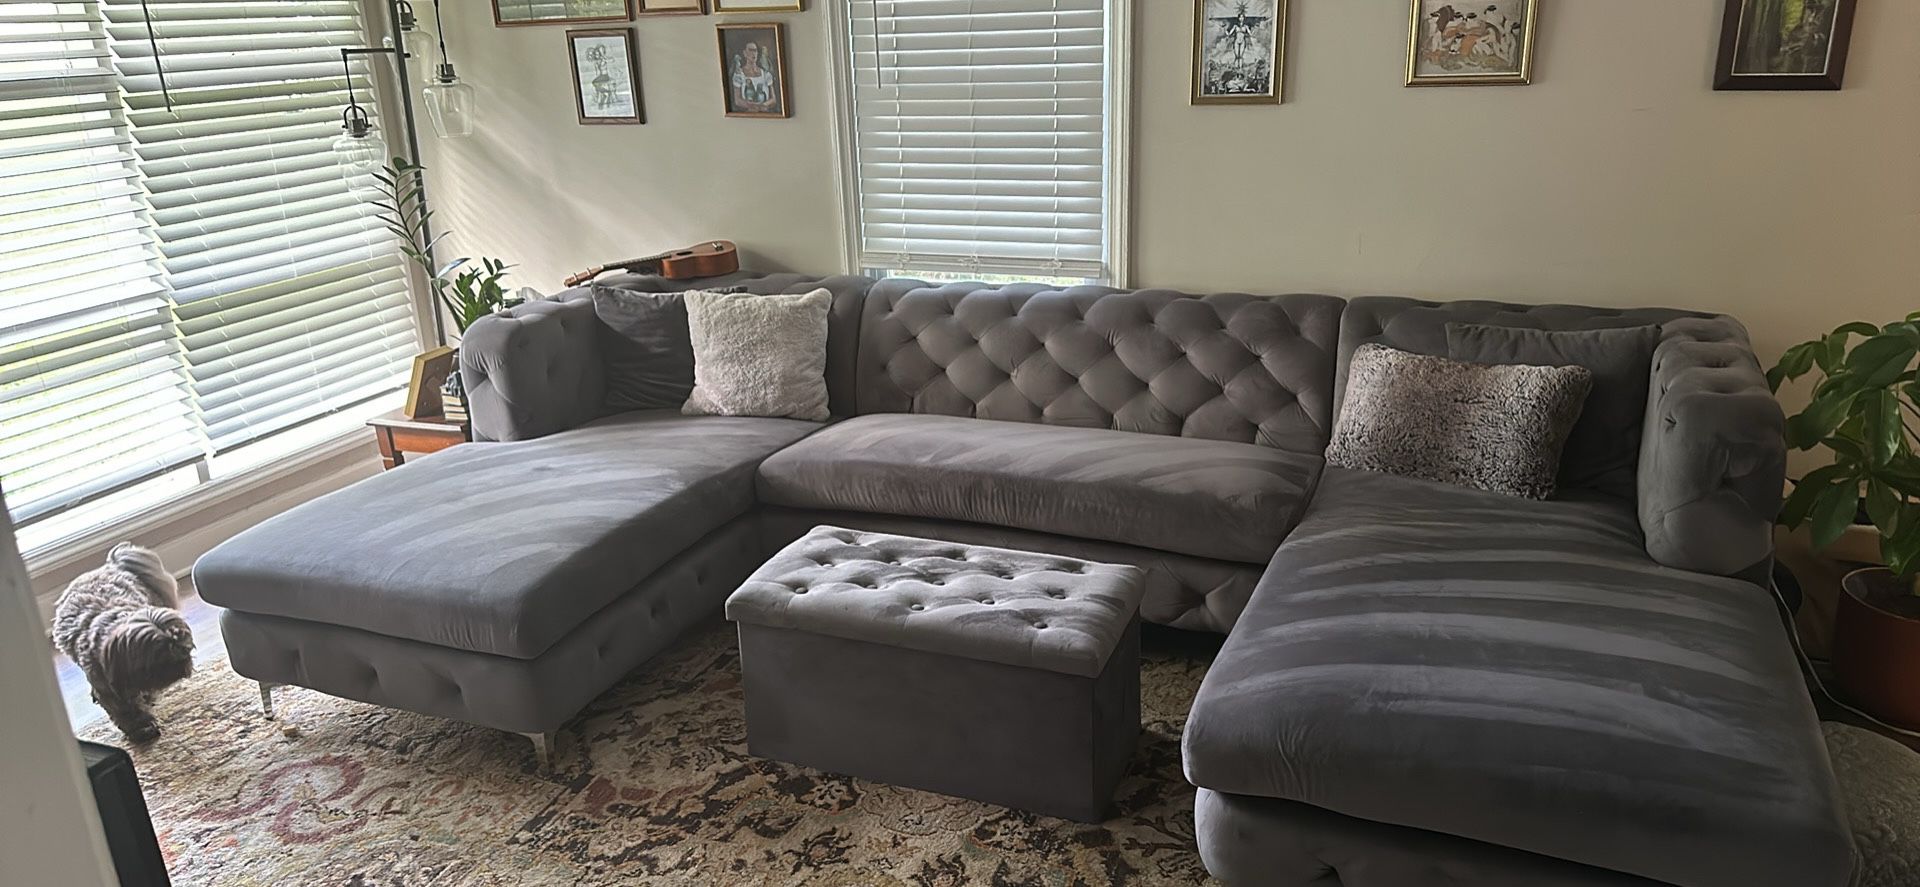 Luxurious Velvet Sectional Couch + Ottoman Included!